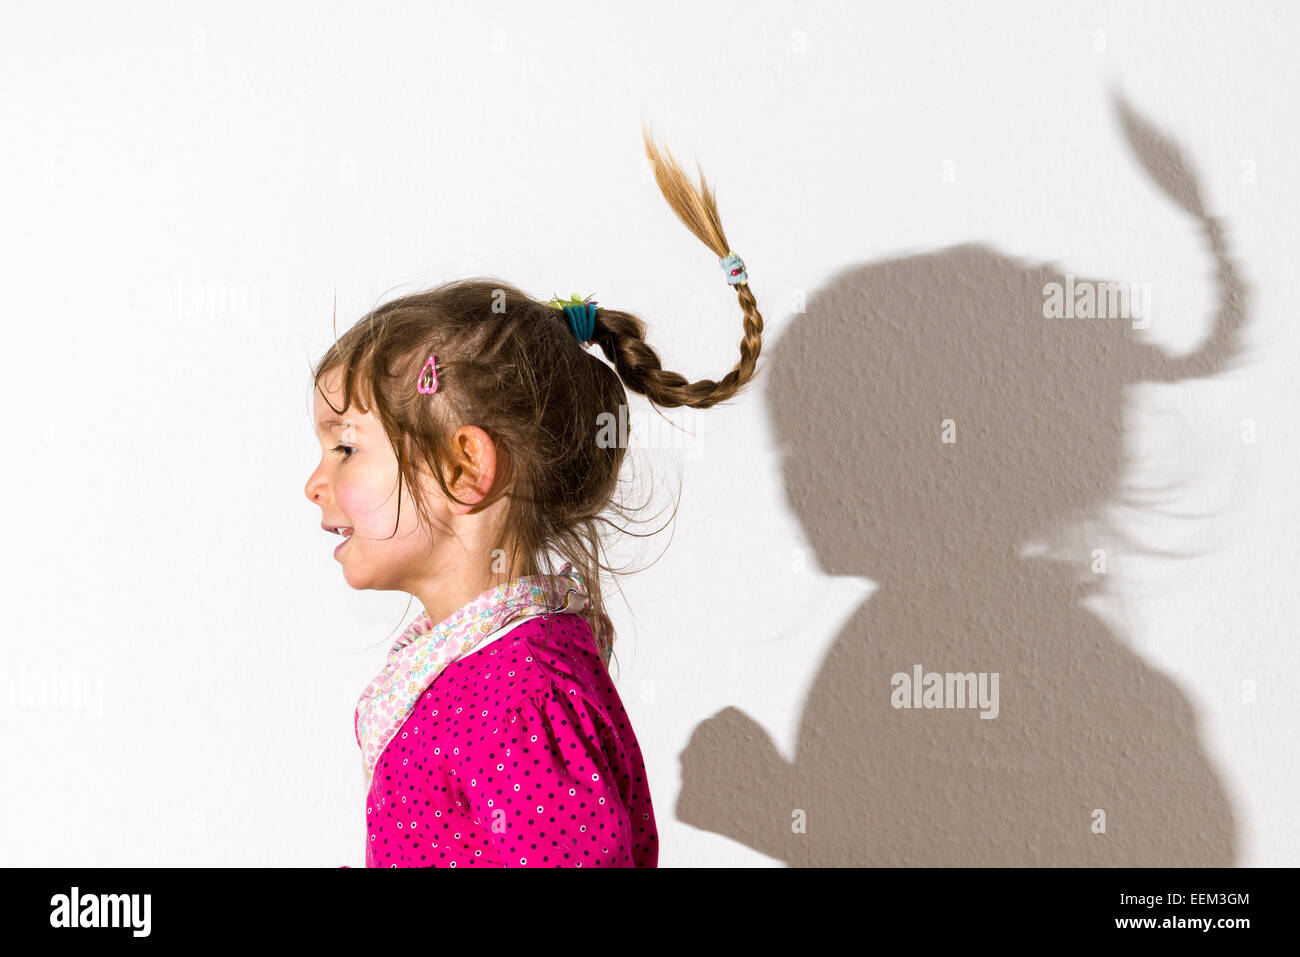 Girl, 3 years, wearing a pink shirt, dancing, casting a shadow on a white  wall Stock Photo - Alamy